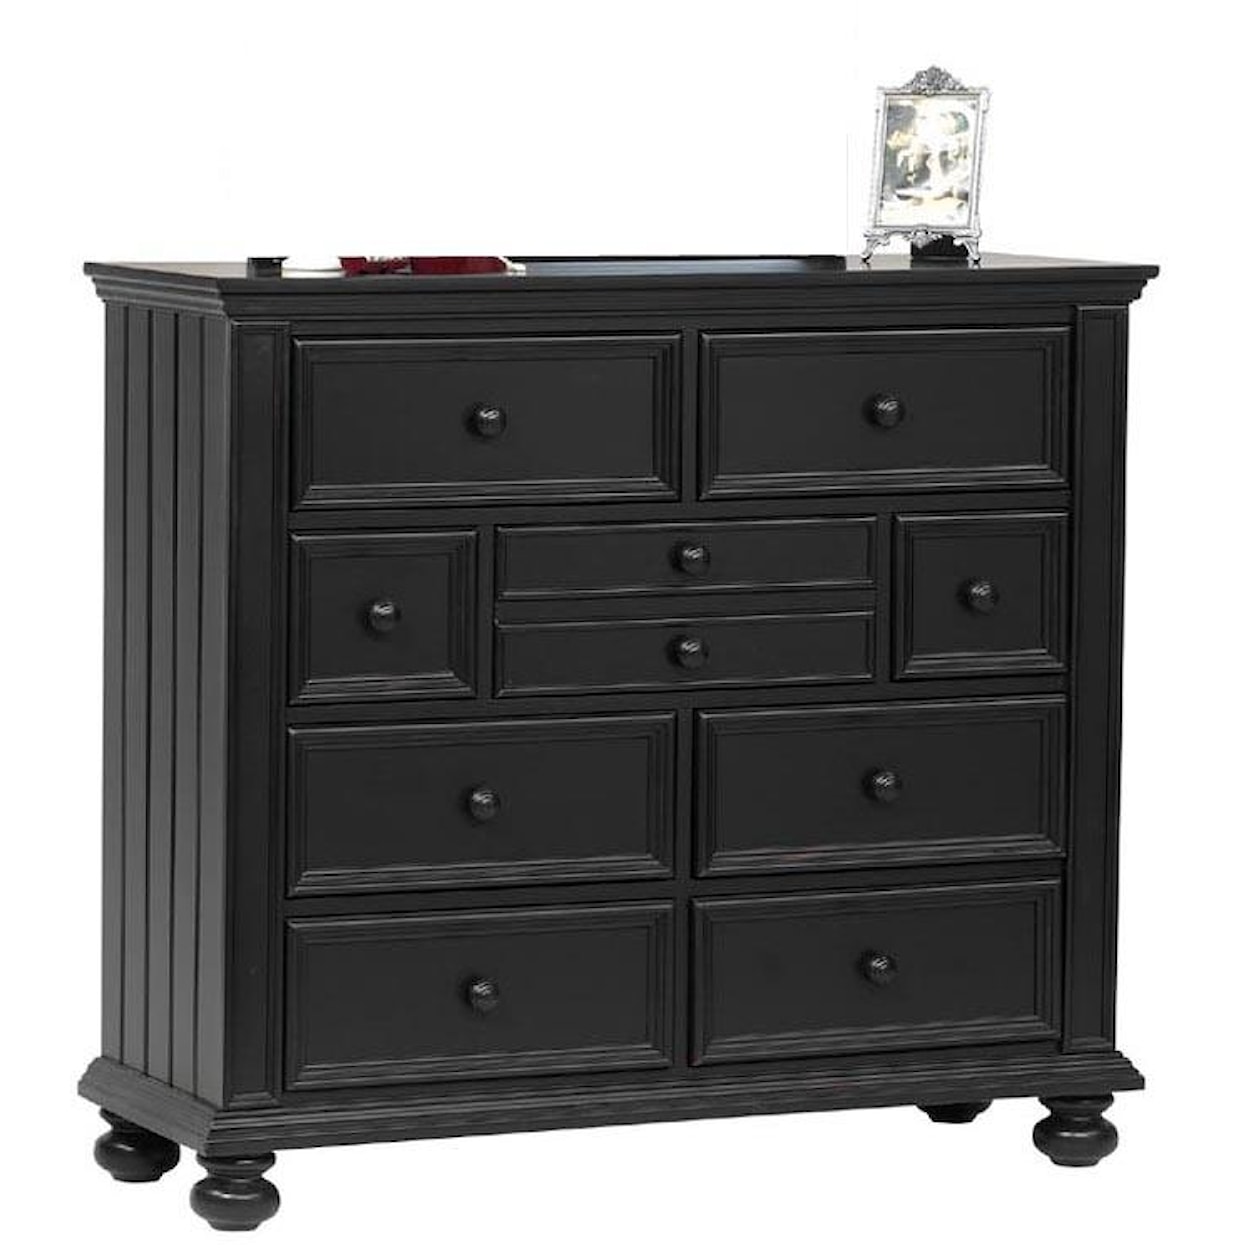 Winners Only Cape Cod  Youth Tall 9-Drawer Dresser